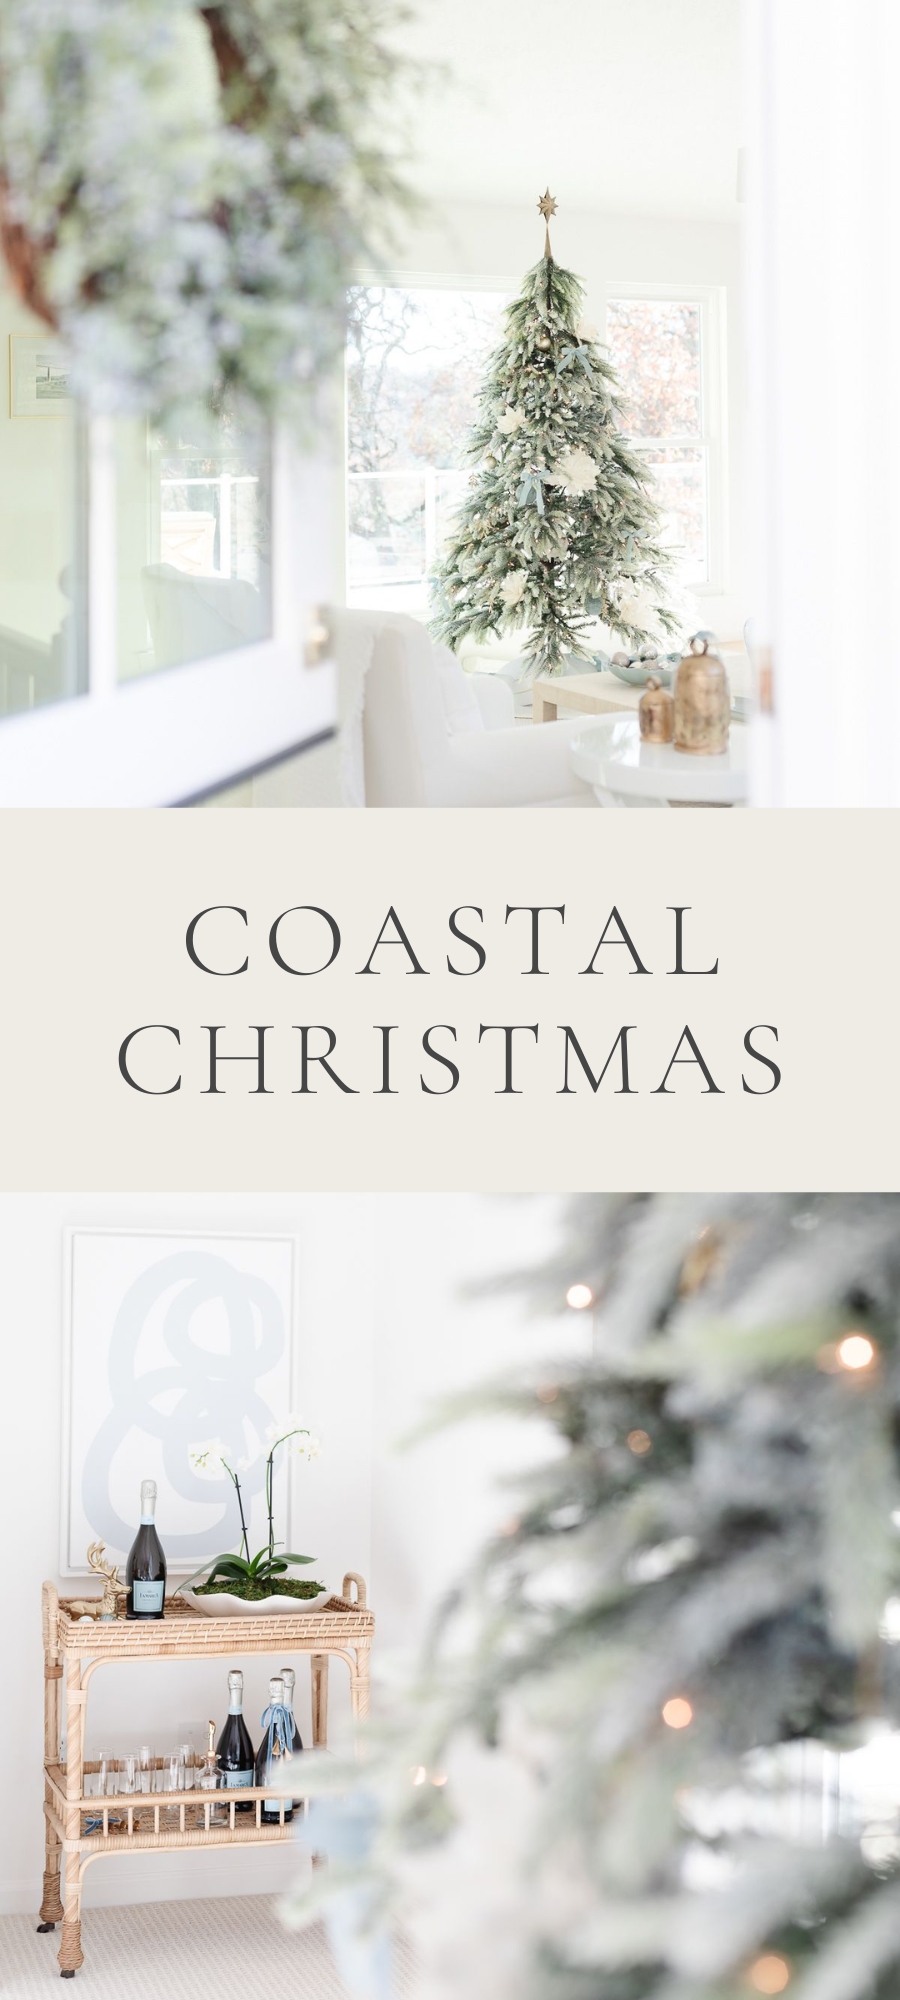 christmas tree with a dutch door opening on the side with a wreath and a bar cart with bottles and decor with caption "coastal christmas"